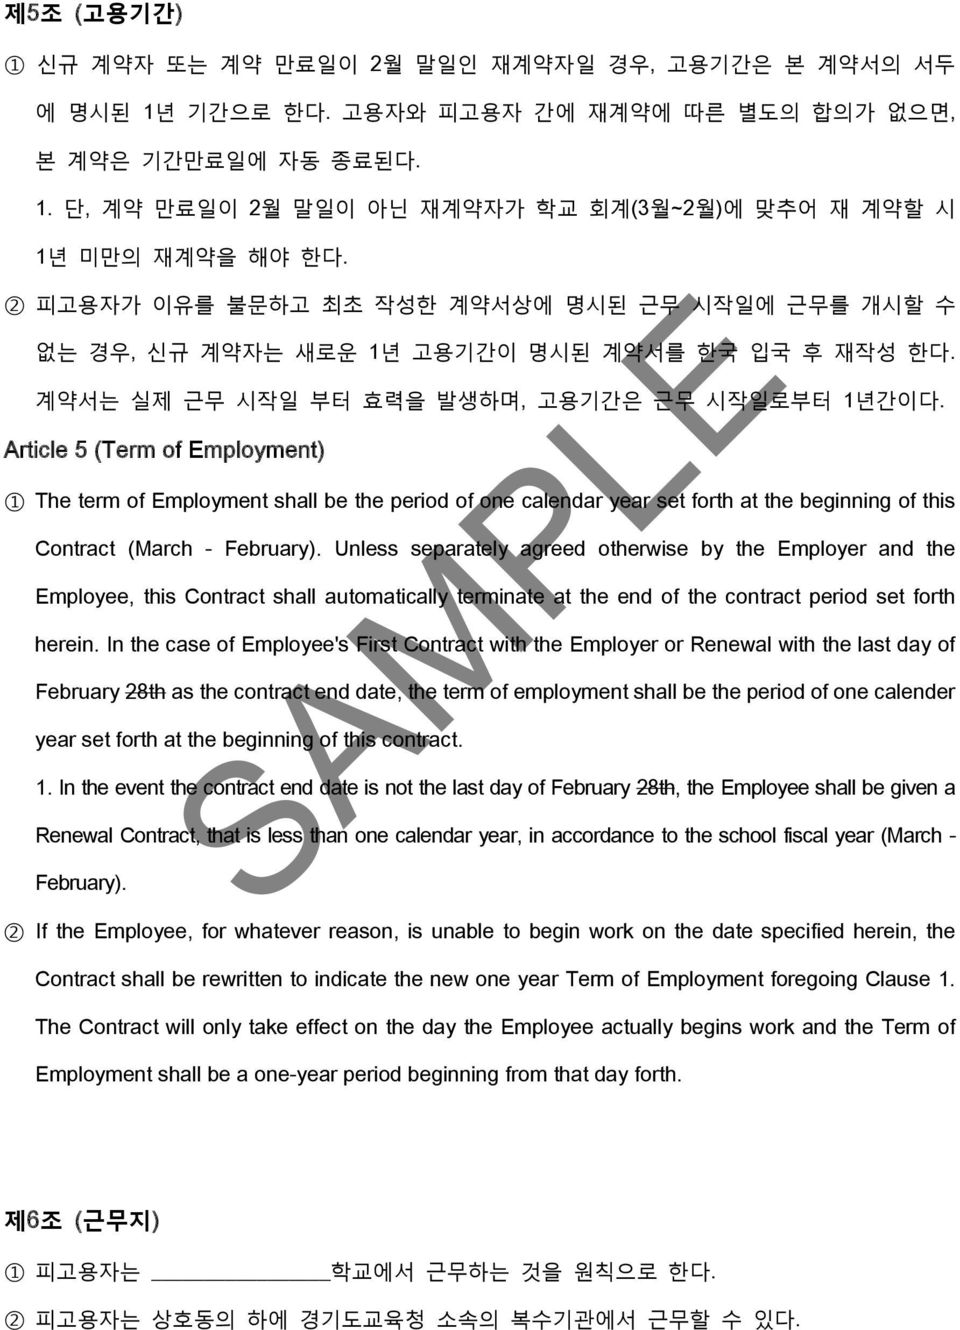 Article 5 (Term of Employment) 1 The term of Employment shall be the period of one calendar year set forth at the beginning of this Contract (March - February).